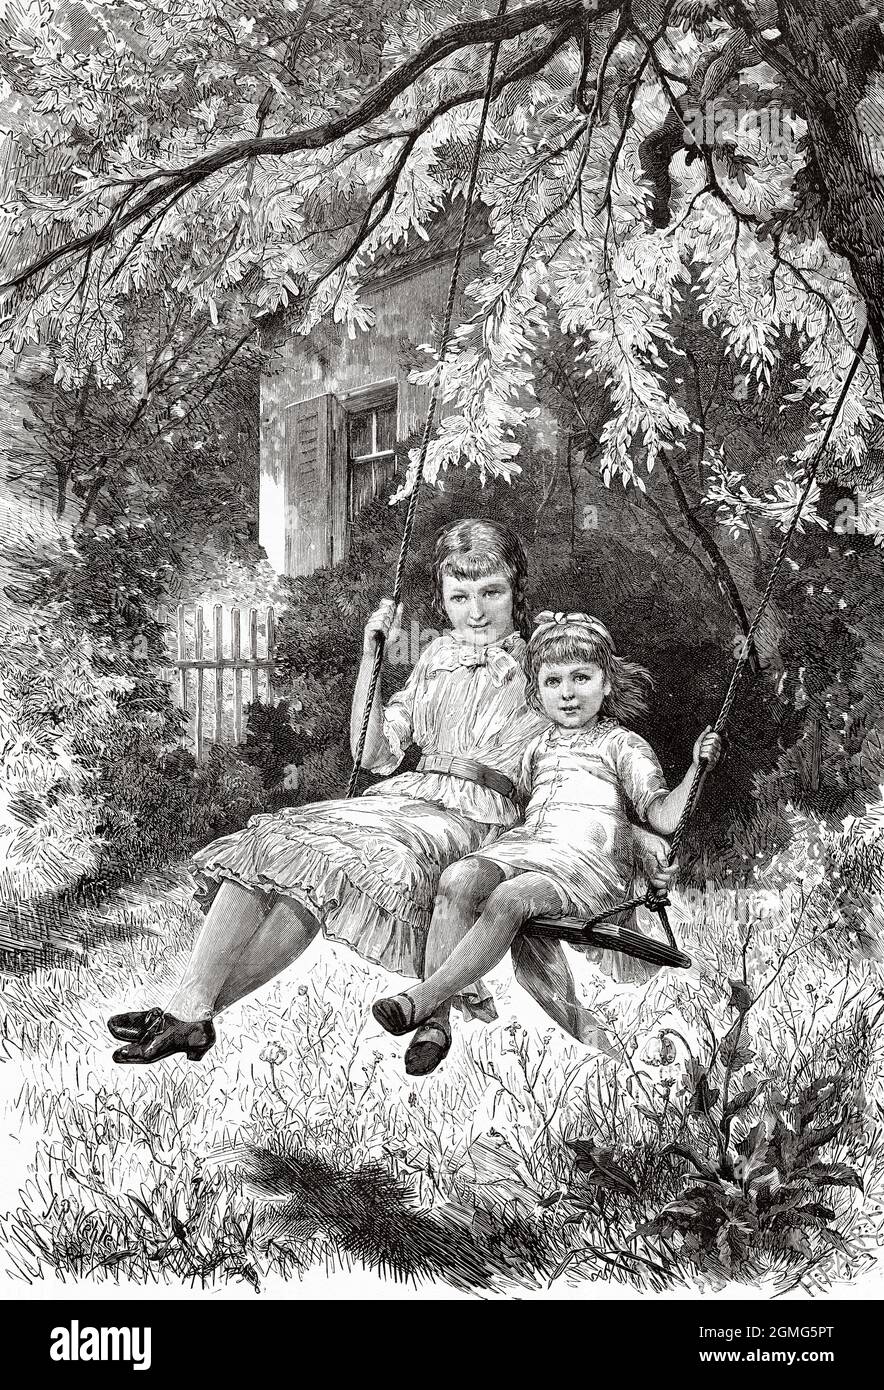 The swing. Two 19th century girls have fun riding on a swing, painting by Johannes Raphael Wehle (1848-1936) German painter and illustrator. Old 19th century engraved illustration from La Ilustración Artística 1882 Stock Photo